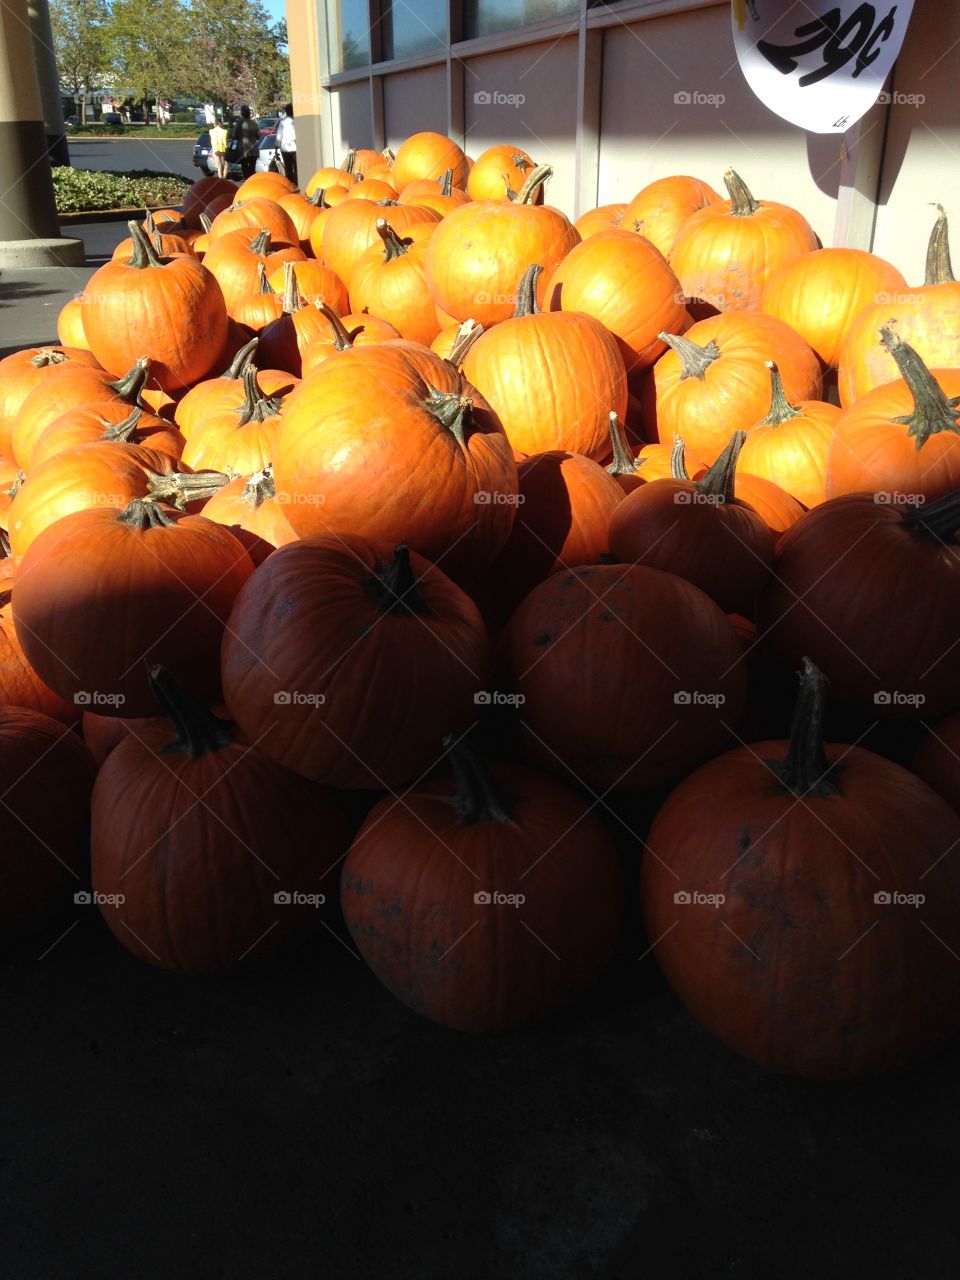 There's Some Pumpkins